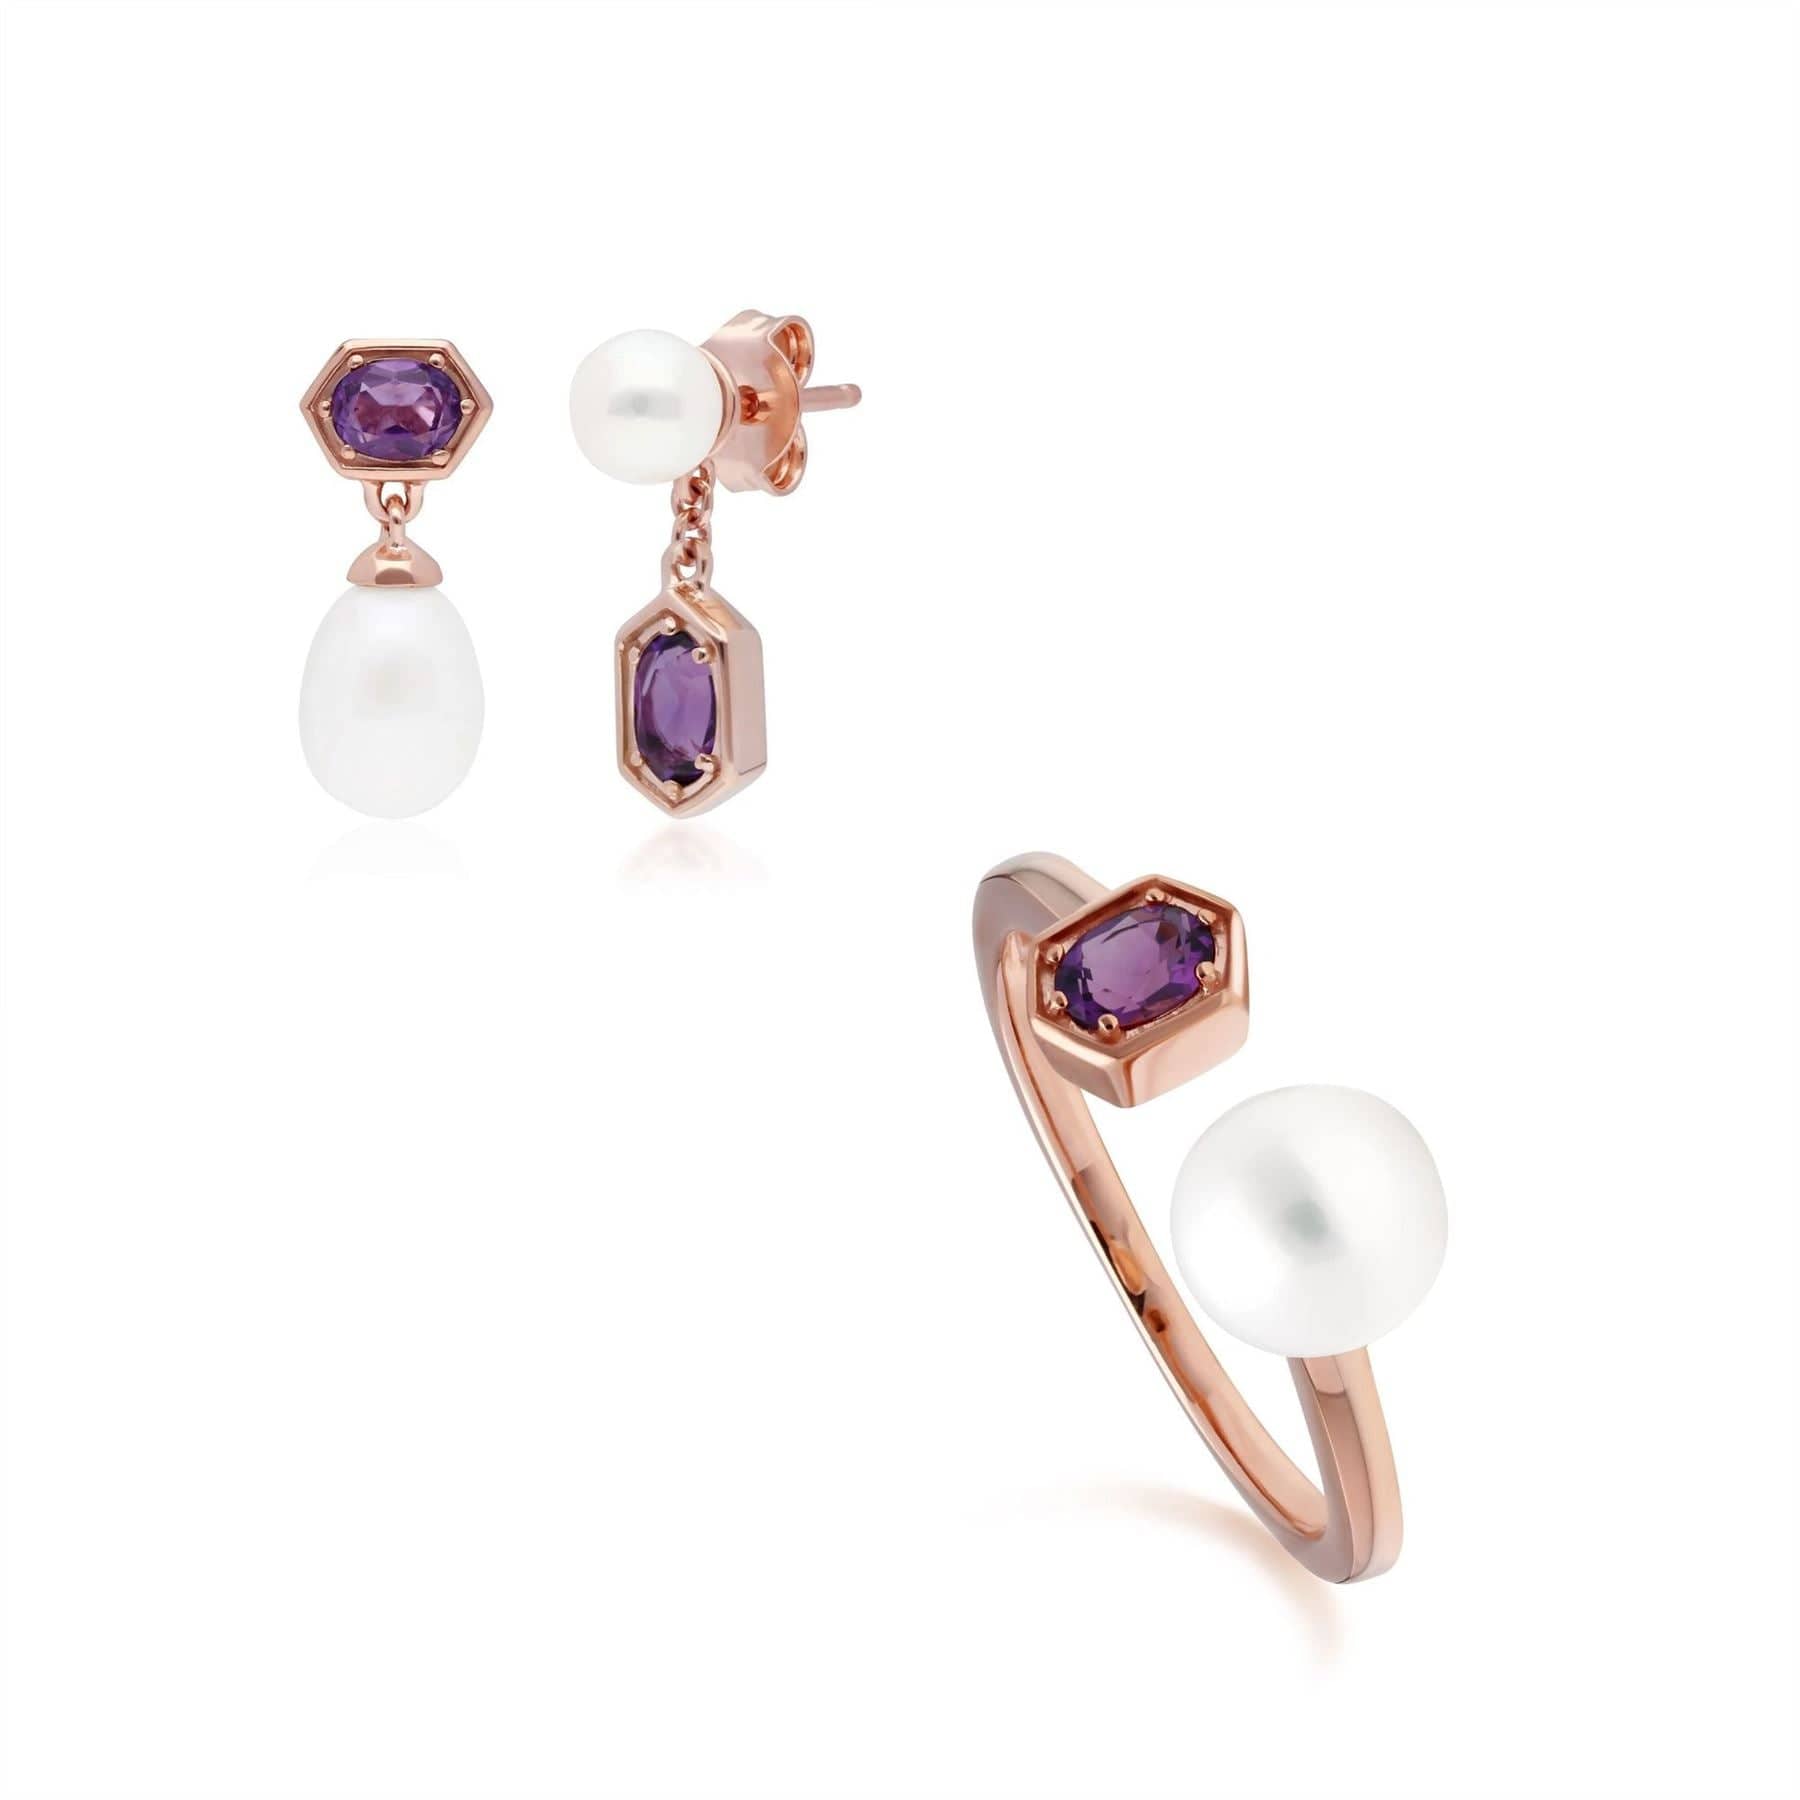 Modern Pearl & Amethyst Earring & Ring Set in Rose Gold Plated Silver - Gemondo